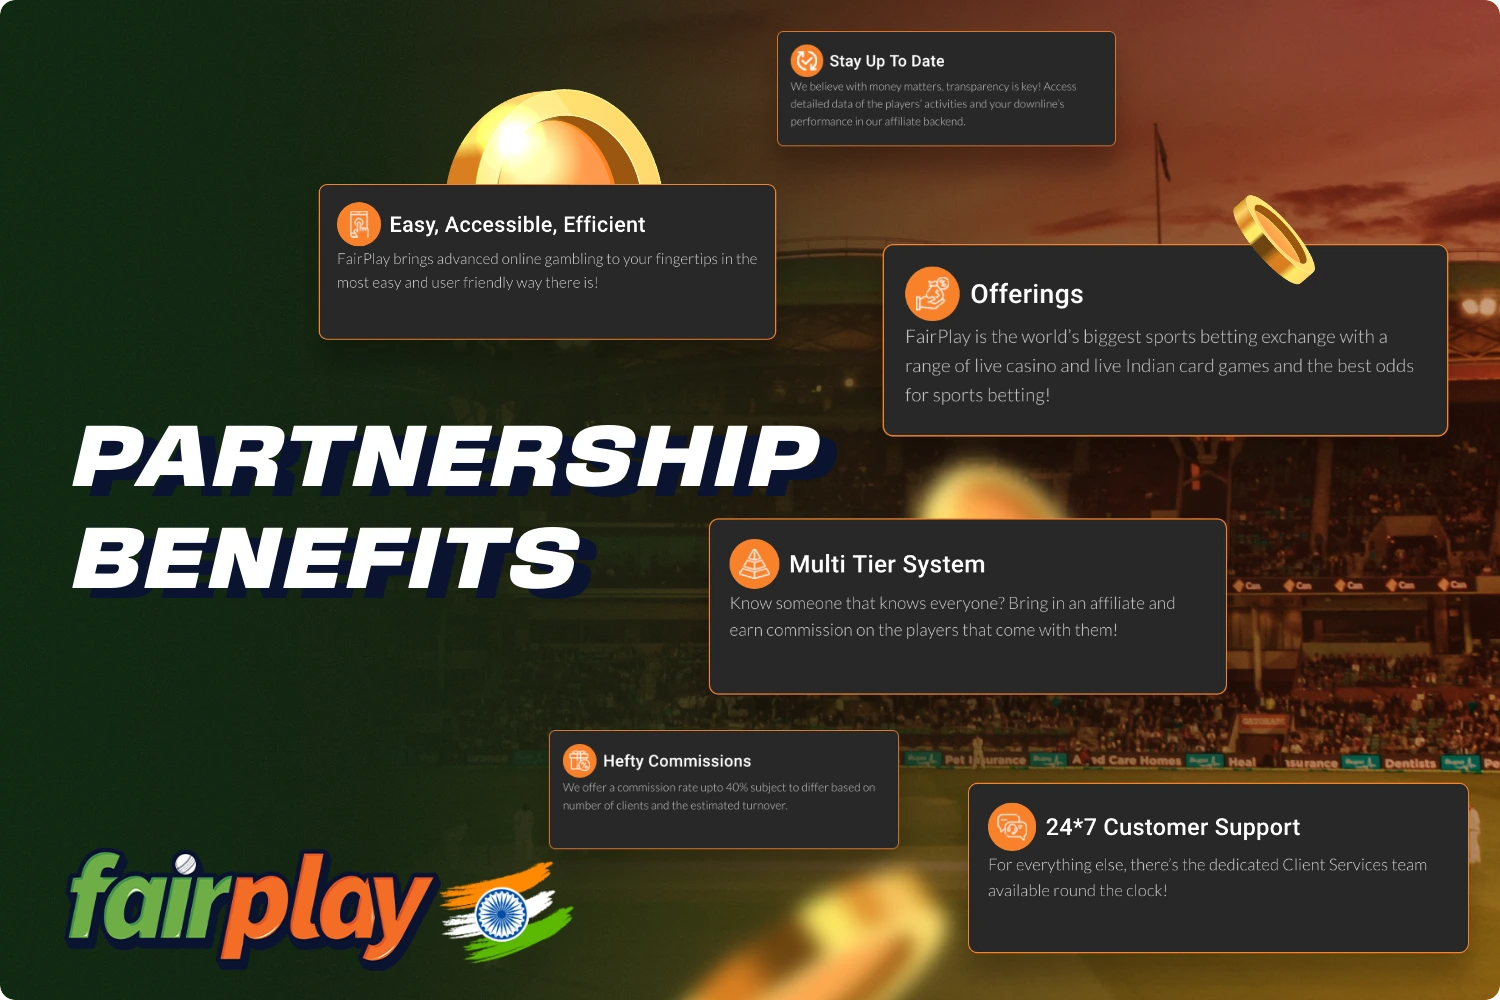 Partnership with Fairplay has a number of advantages that allow you to earn good money without much difficulty simply by attracting new customers